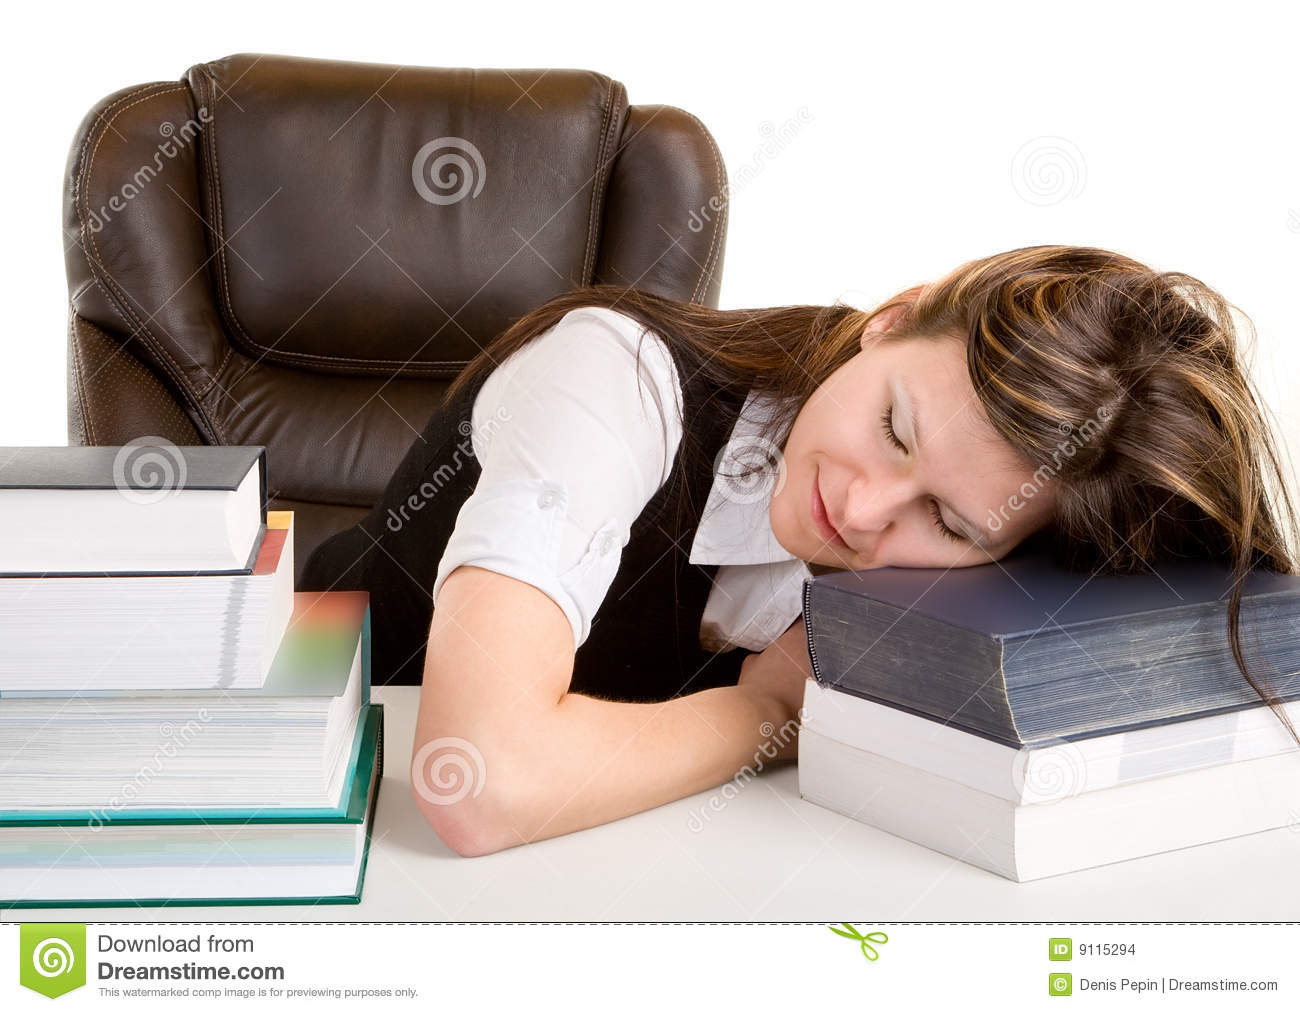 Exhausted Student Sleeping On Her Books Stock Images   Image  9115294